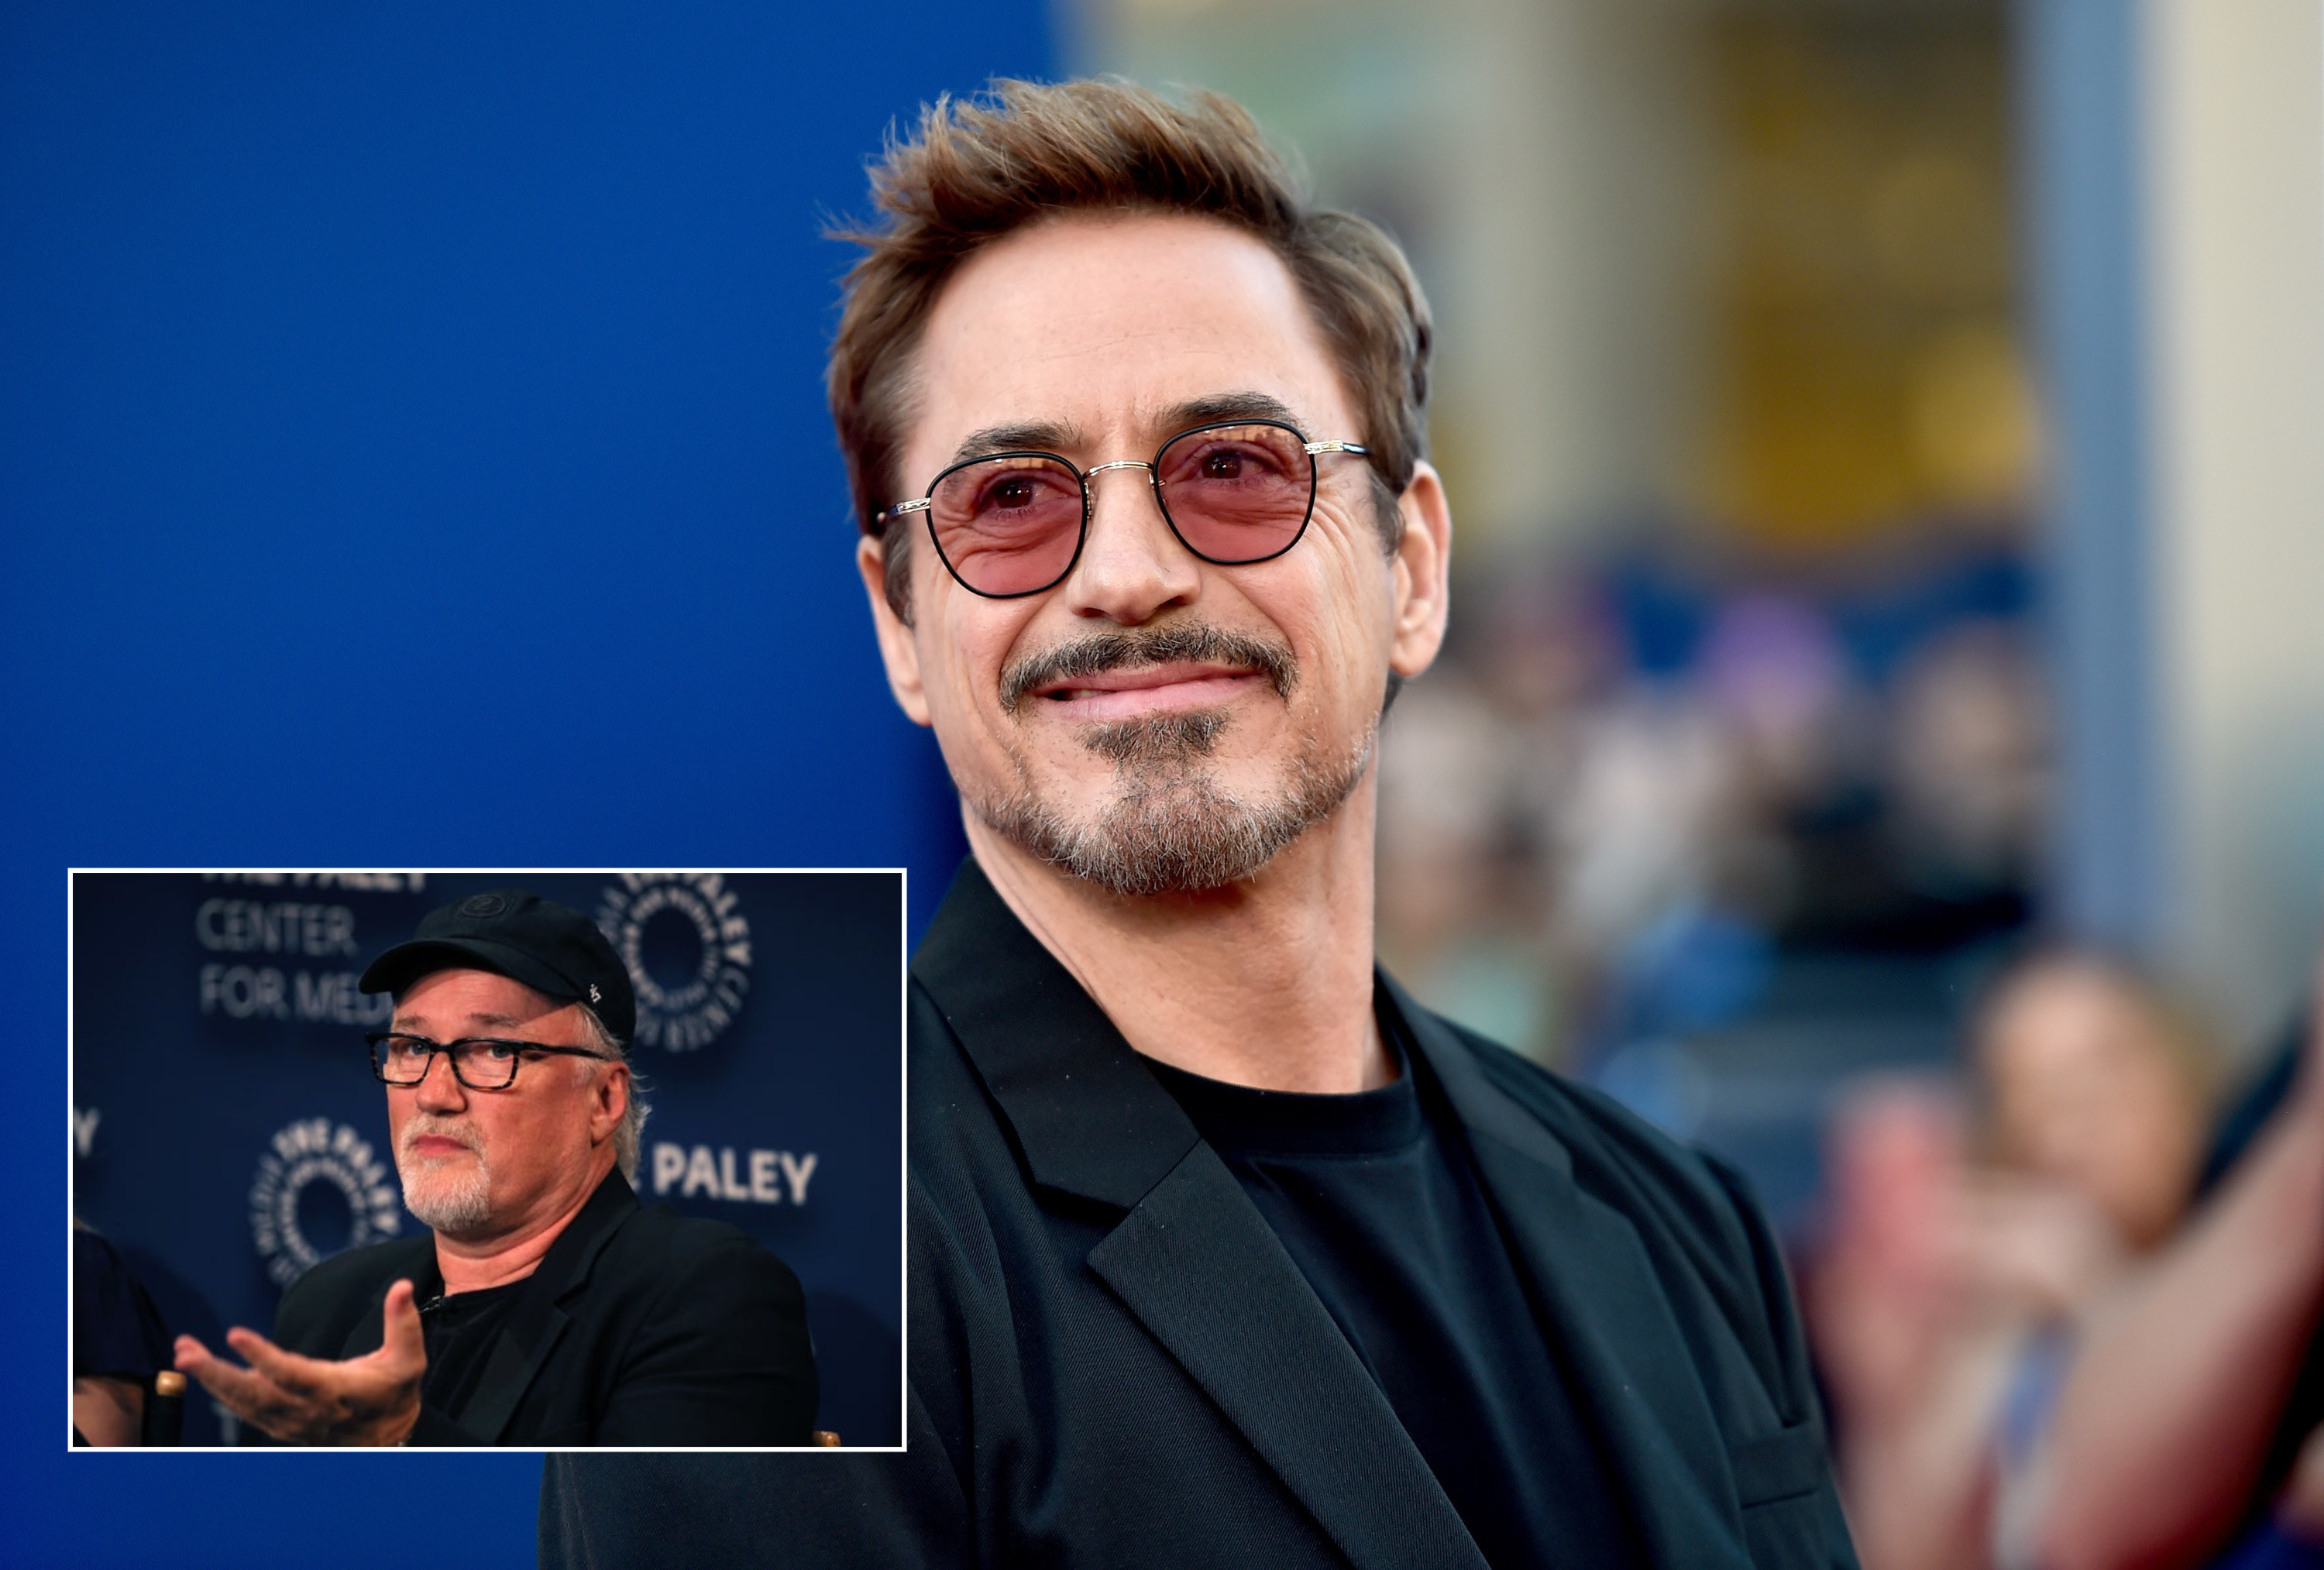 Robert Downey Jr. attends the premiere of Columbia Pictures&#x27; &quot;Spider-Man: Homecoming&quot; at TCL Chinese Theatre on June 28, 2017 in Hollywood, California and in the other picture director David Fincher appears on stage at The Paley Center for Media in 2019